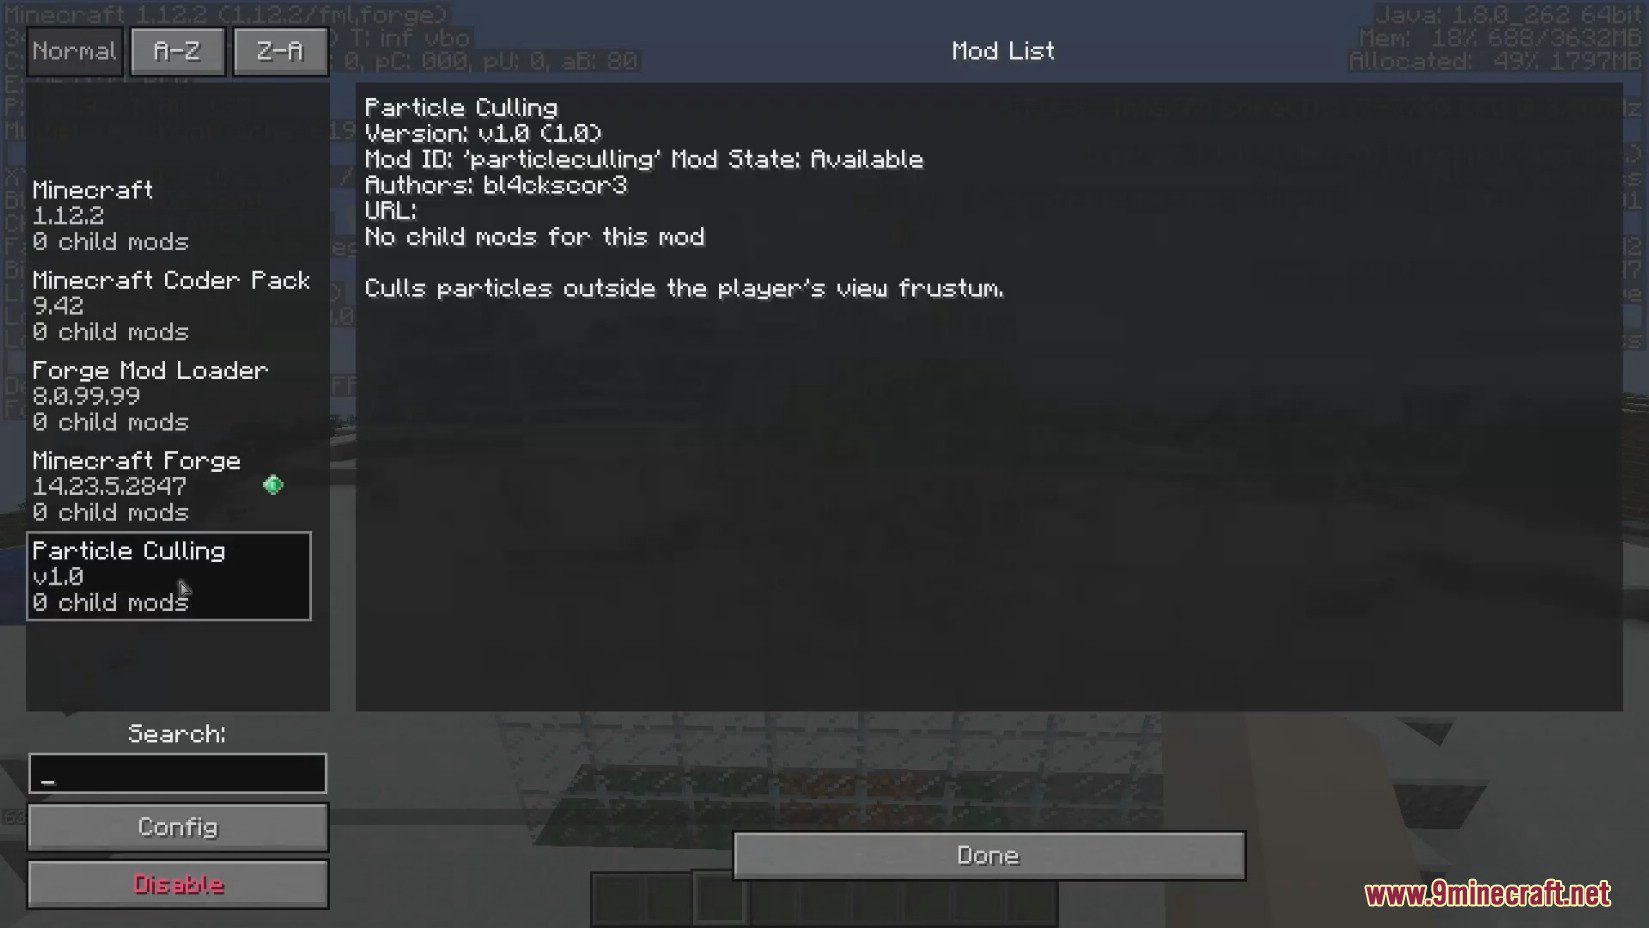 Particle Culling Mod (1.12.2) - Culls Particles Outside The Player's View Frustum 8